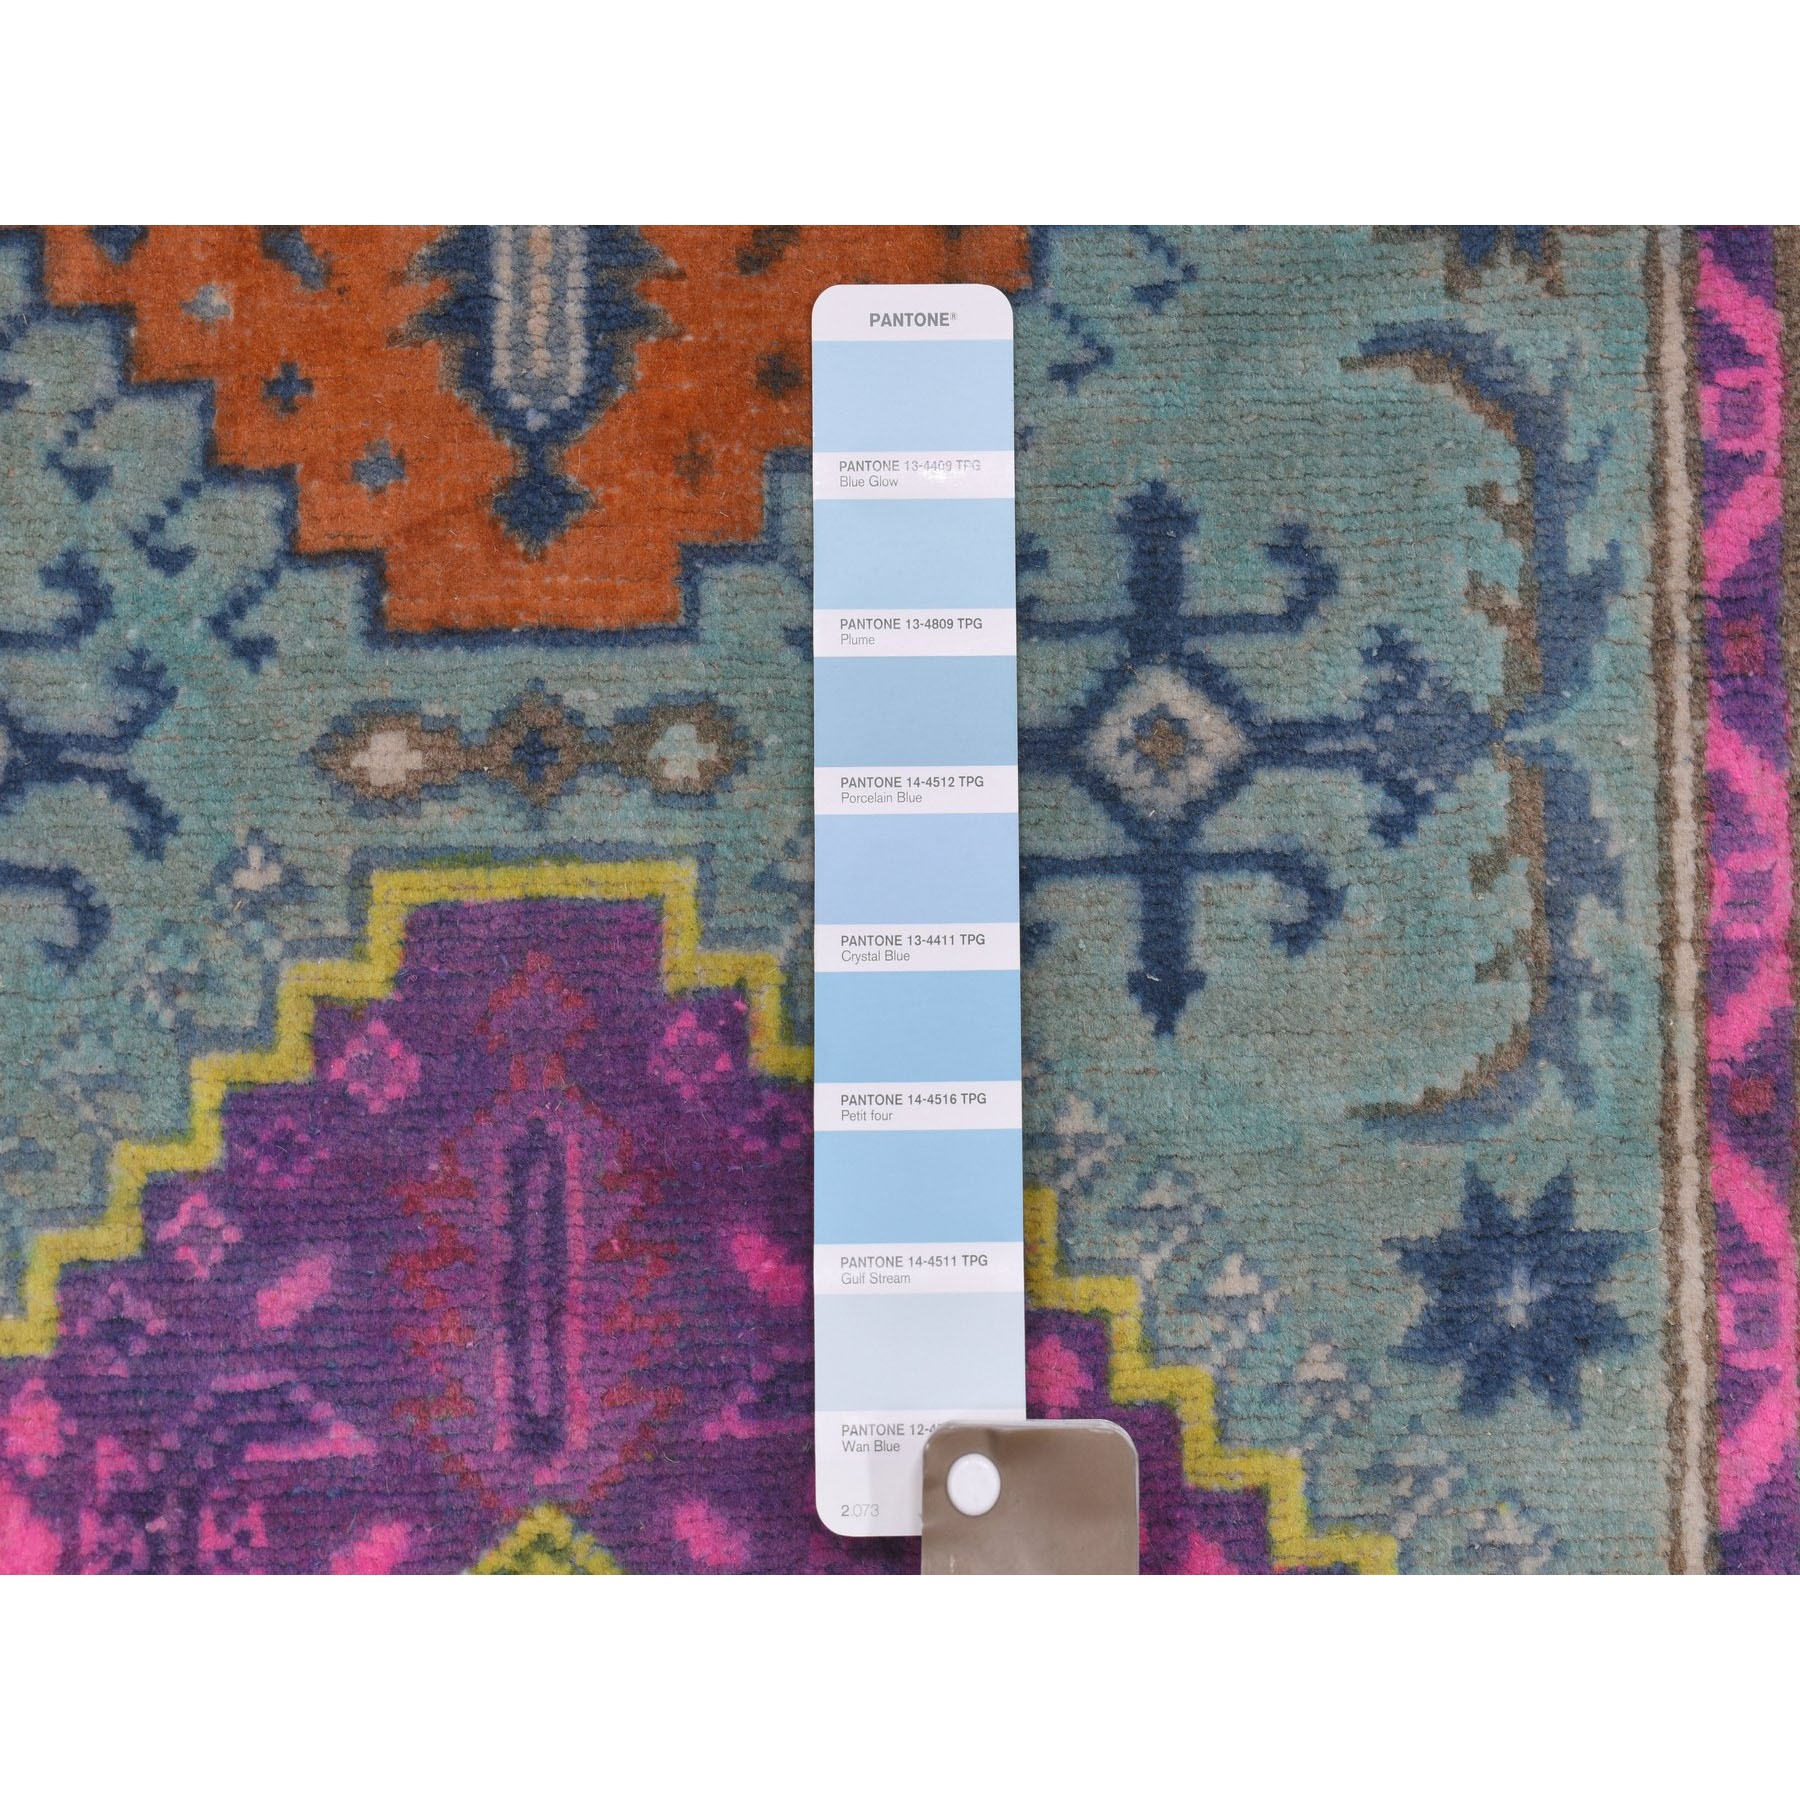 2-8 x8- Colorful Blue Fusion Kazak Pure Wool Runner Geometric Design Hand Knotted Oriental Rug 